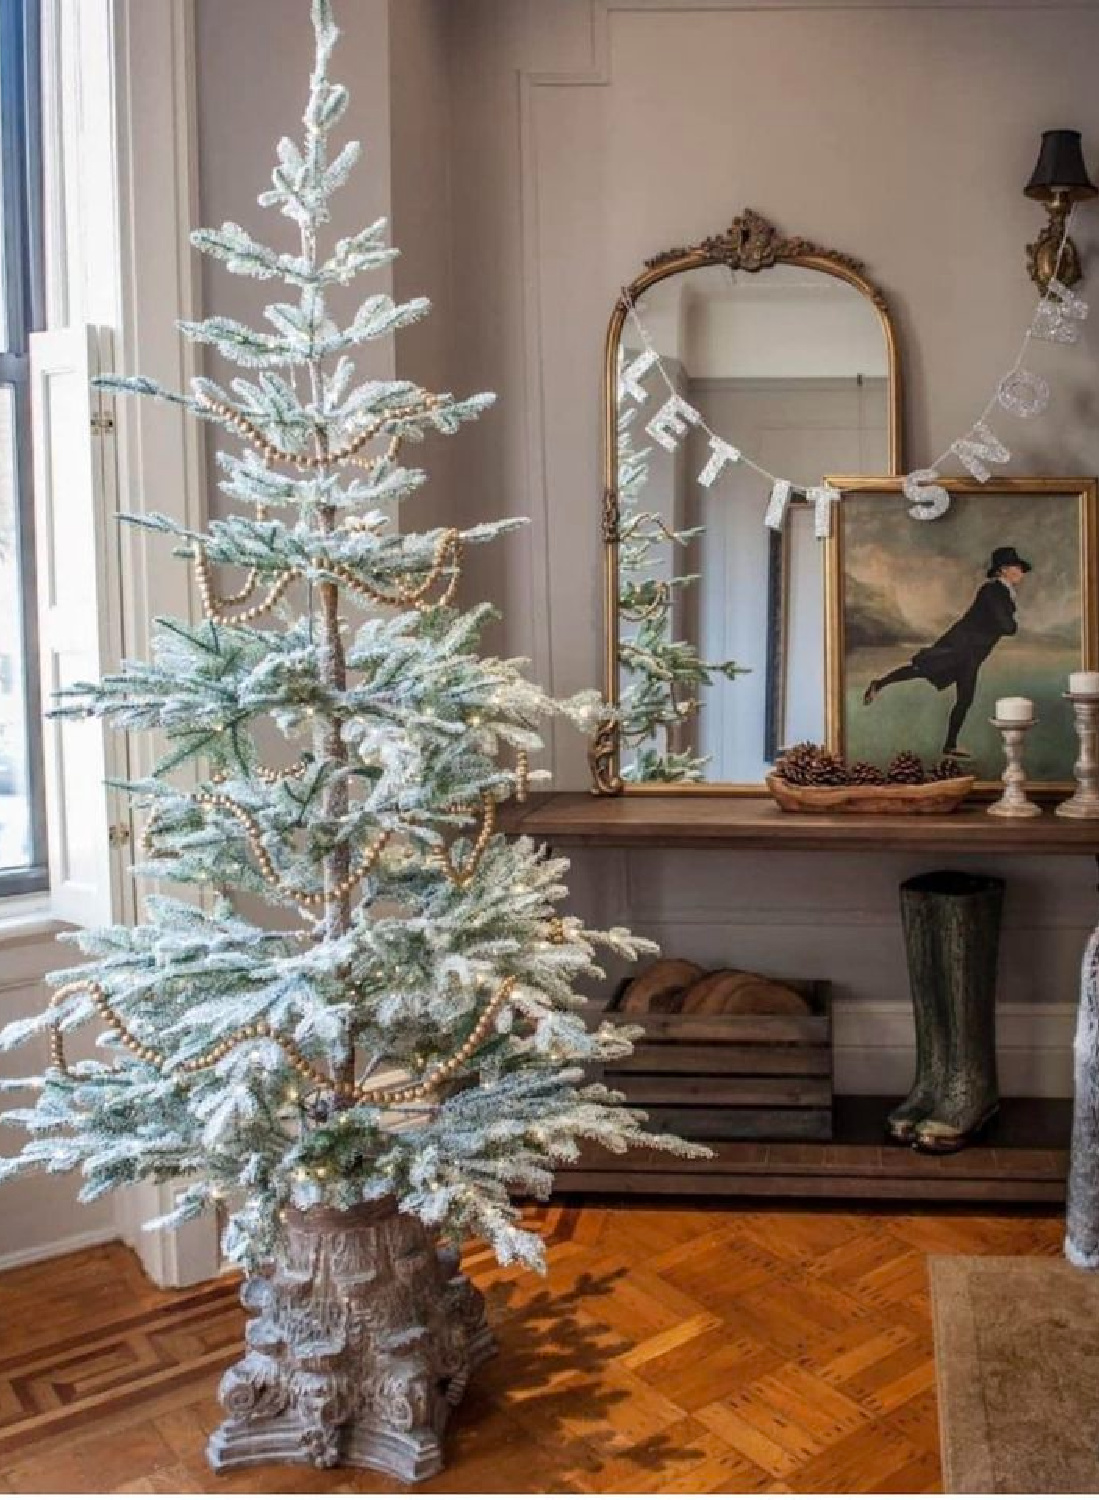 French country rustic Christmas - AI Design via Whitney Hess (Just Decorate!). #aidesign #aiinteriordesign #aiarchitecture